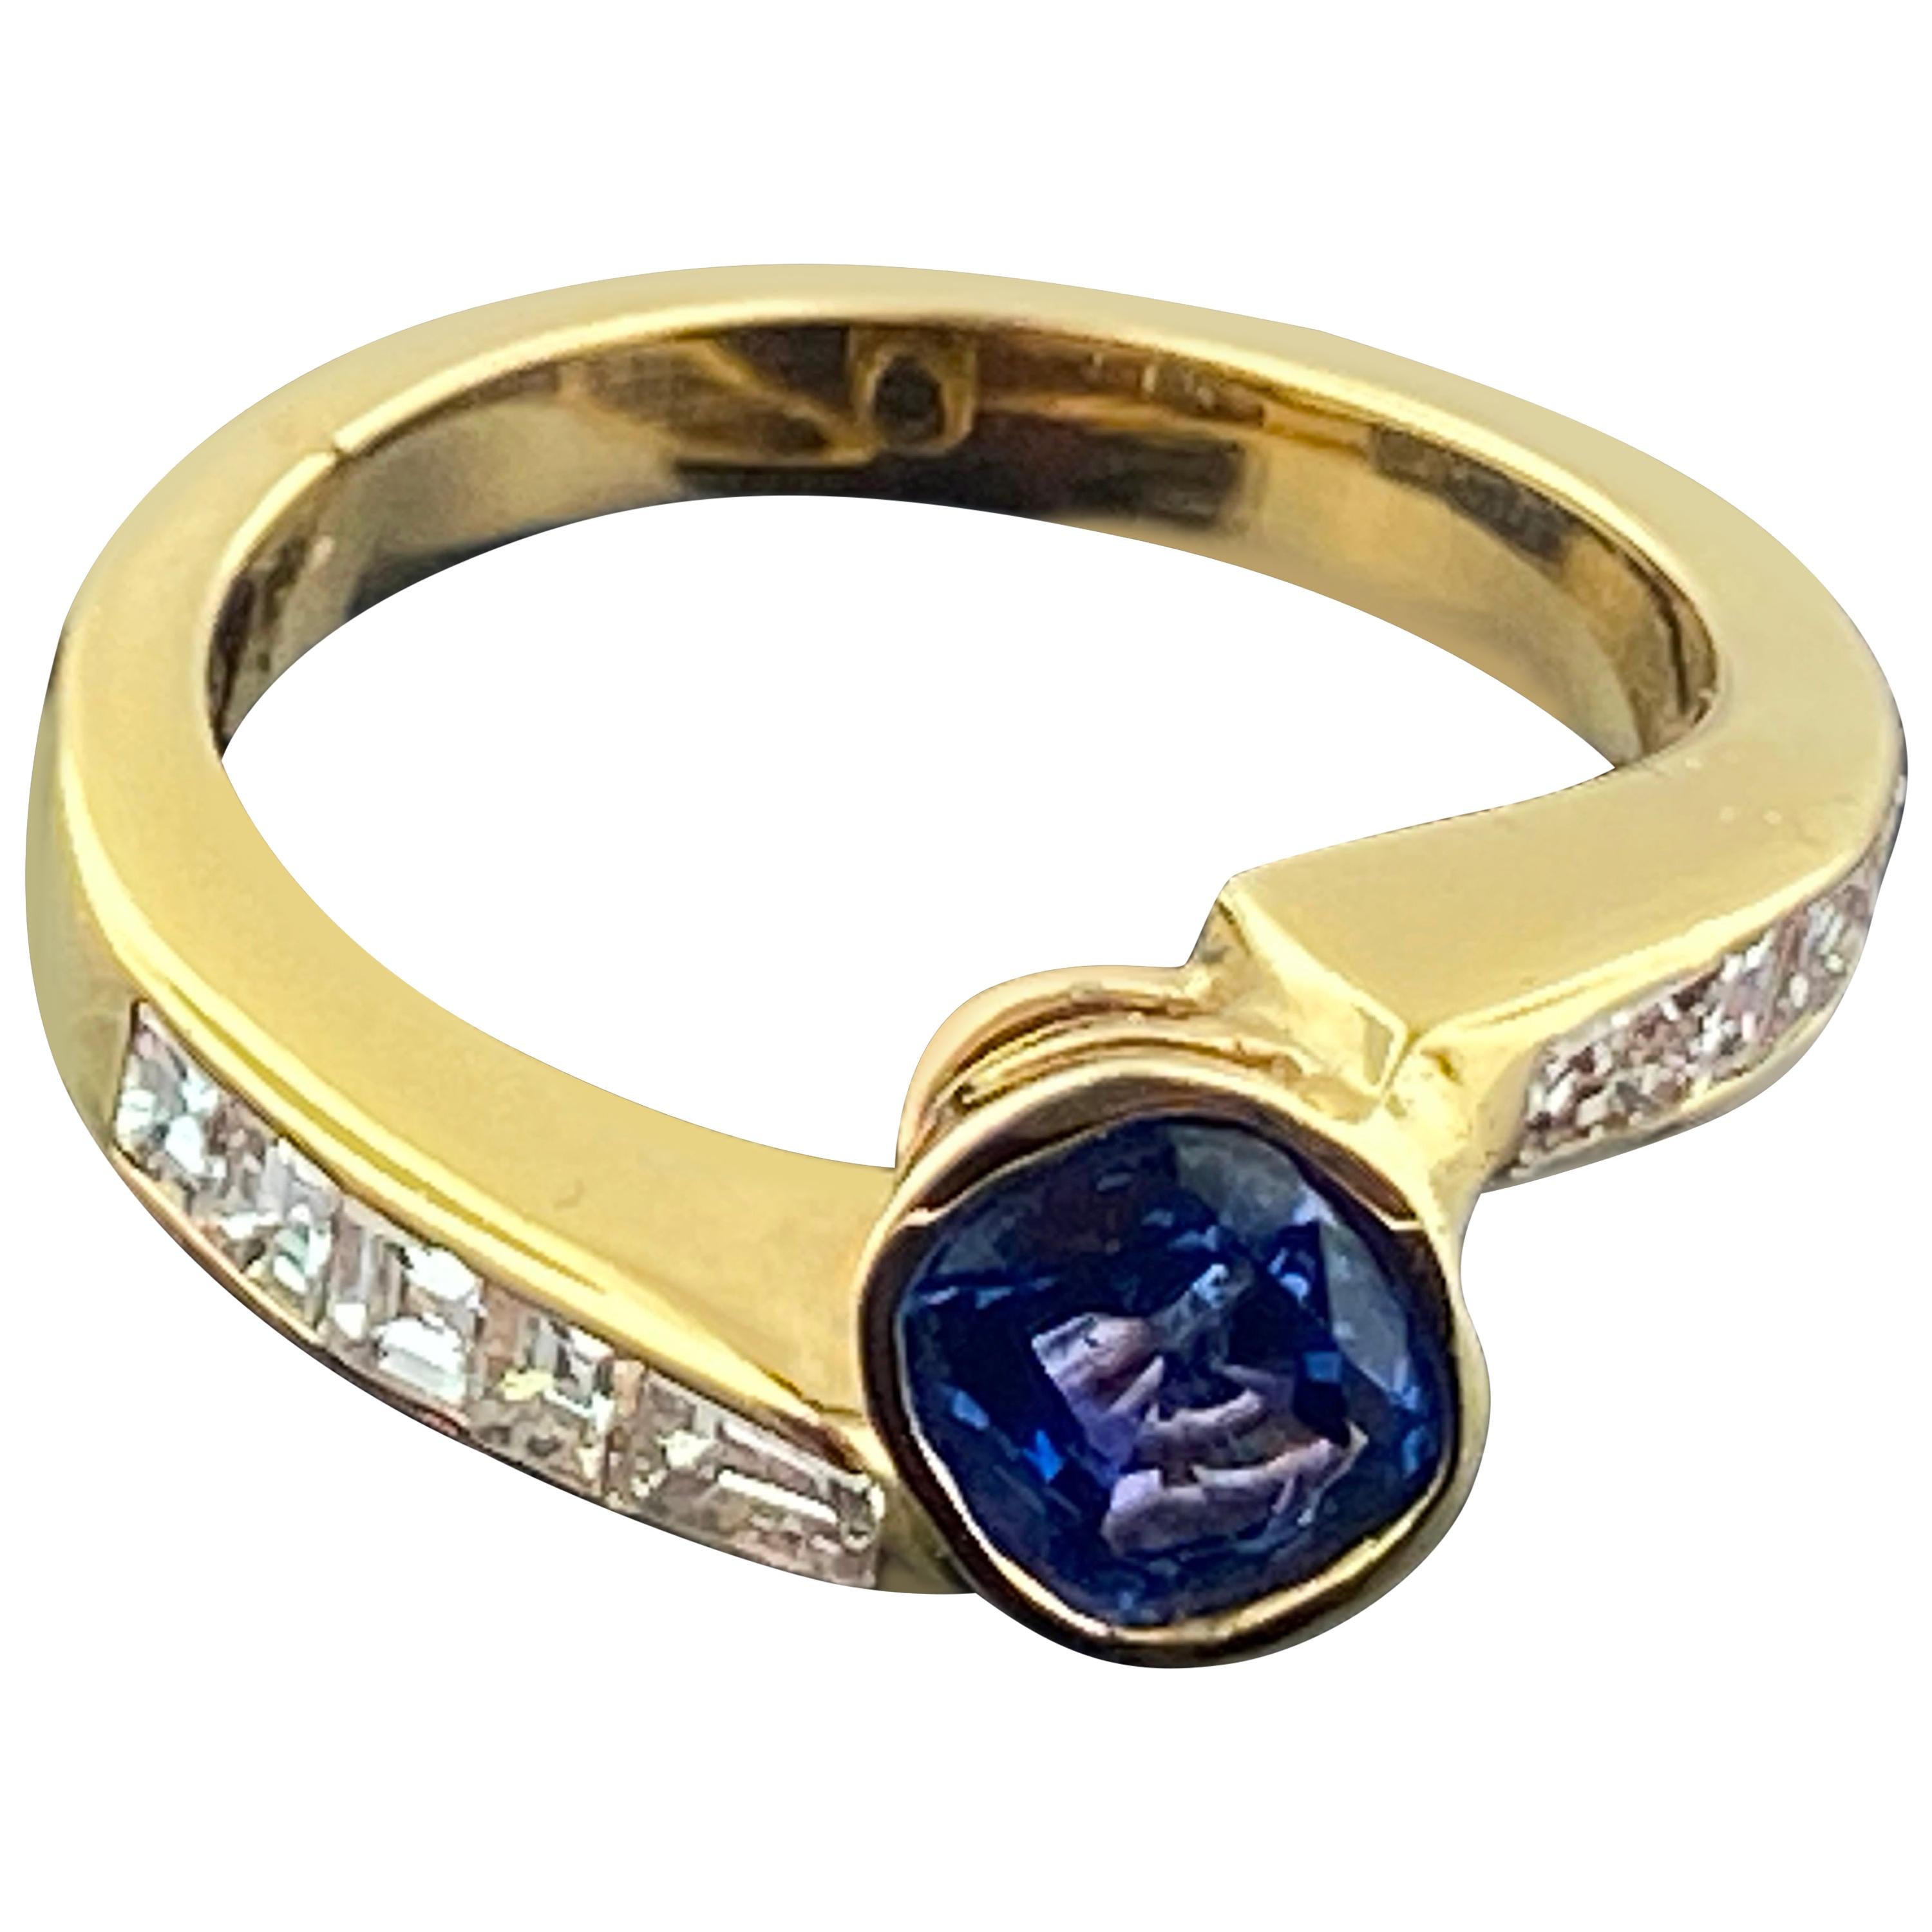 Blue Sapphire Ring with Diamonds in 14 Karat Yellow Gold